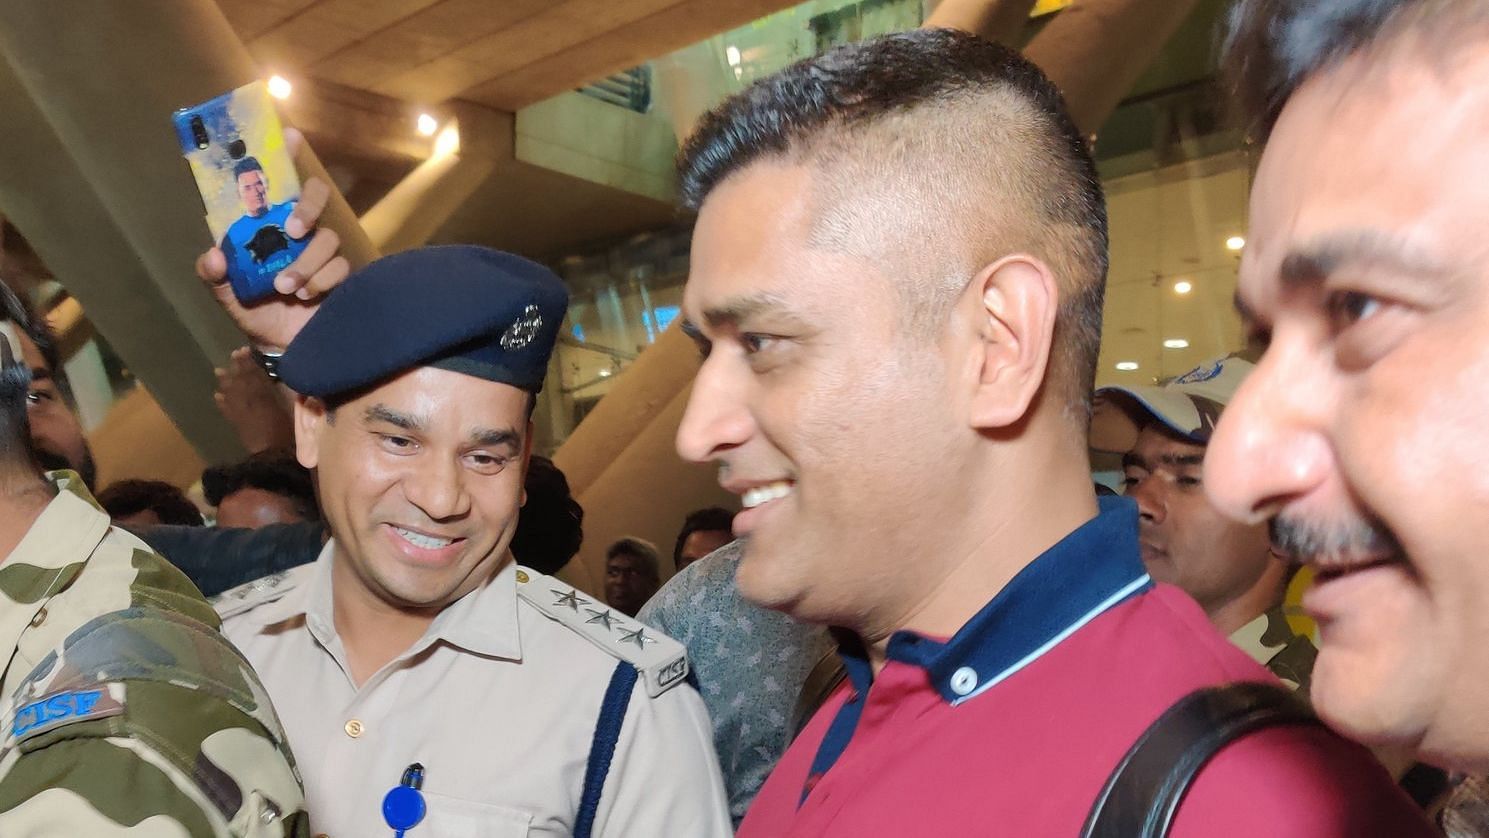 MS Dhoni has landed in Chennai for the 2020 IPL season.